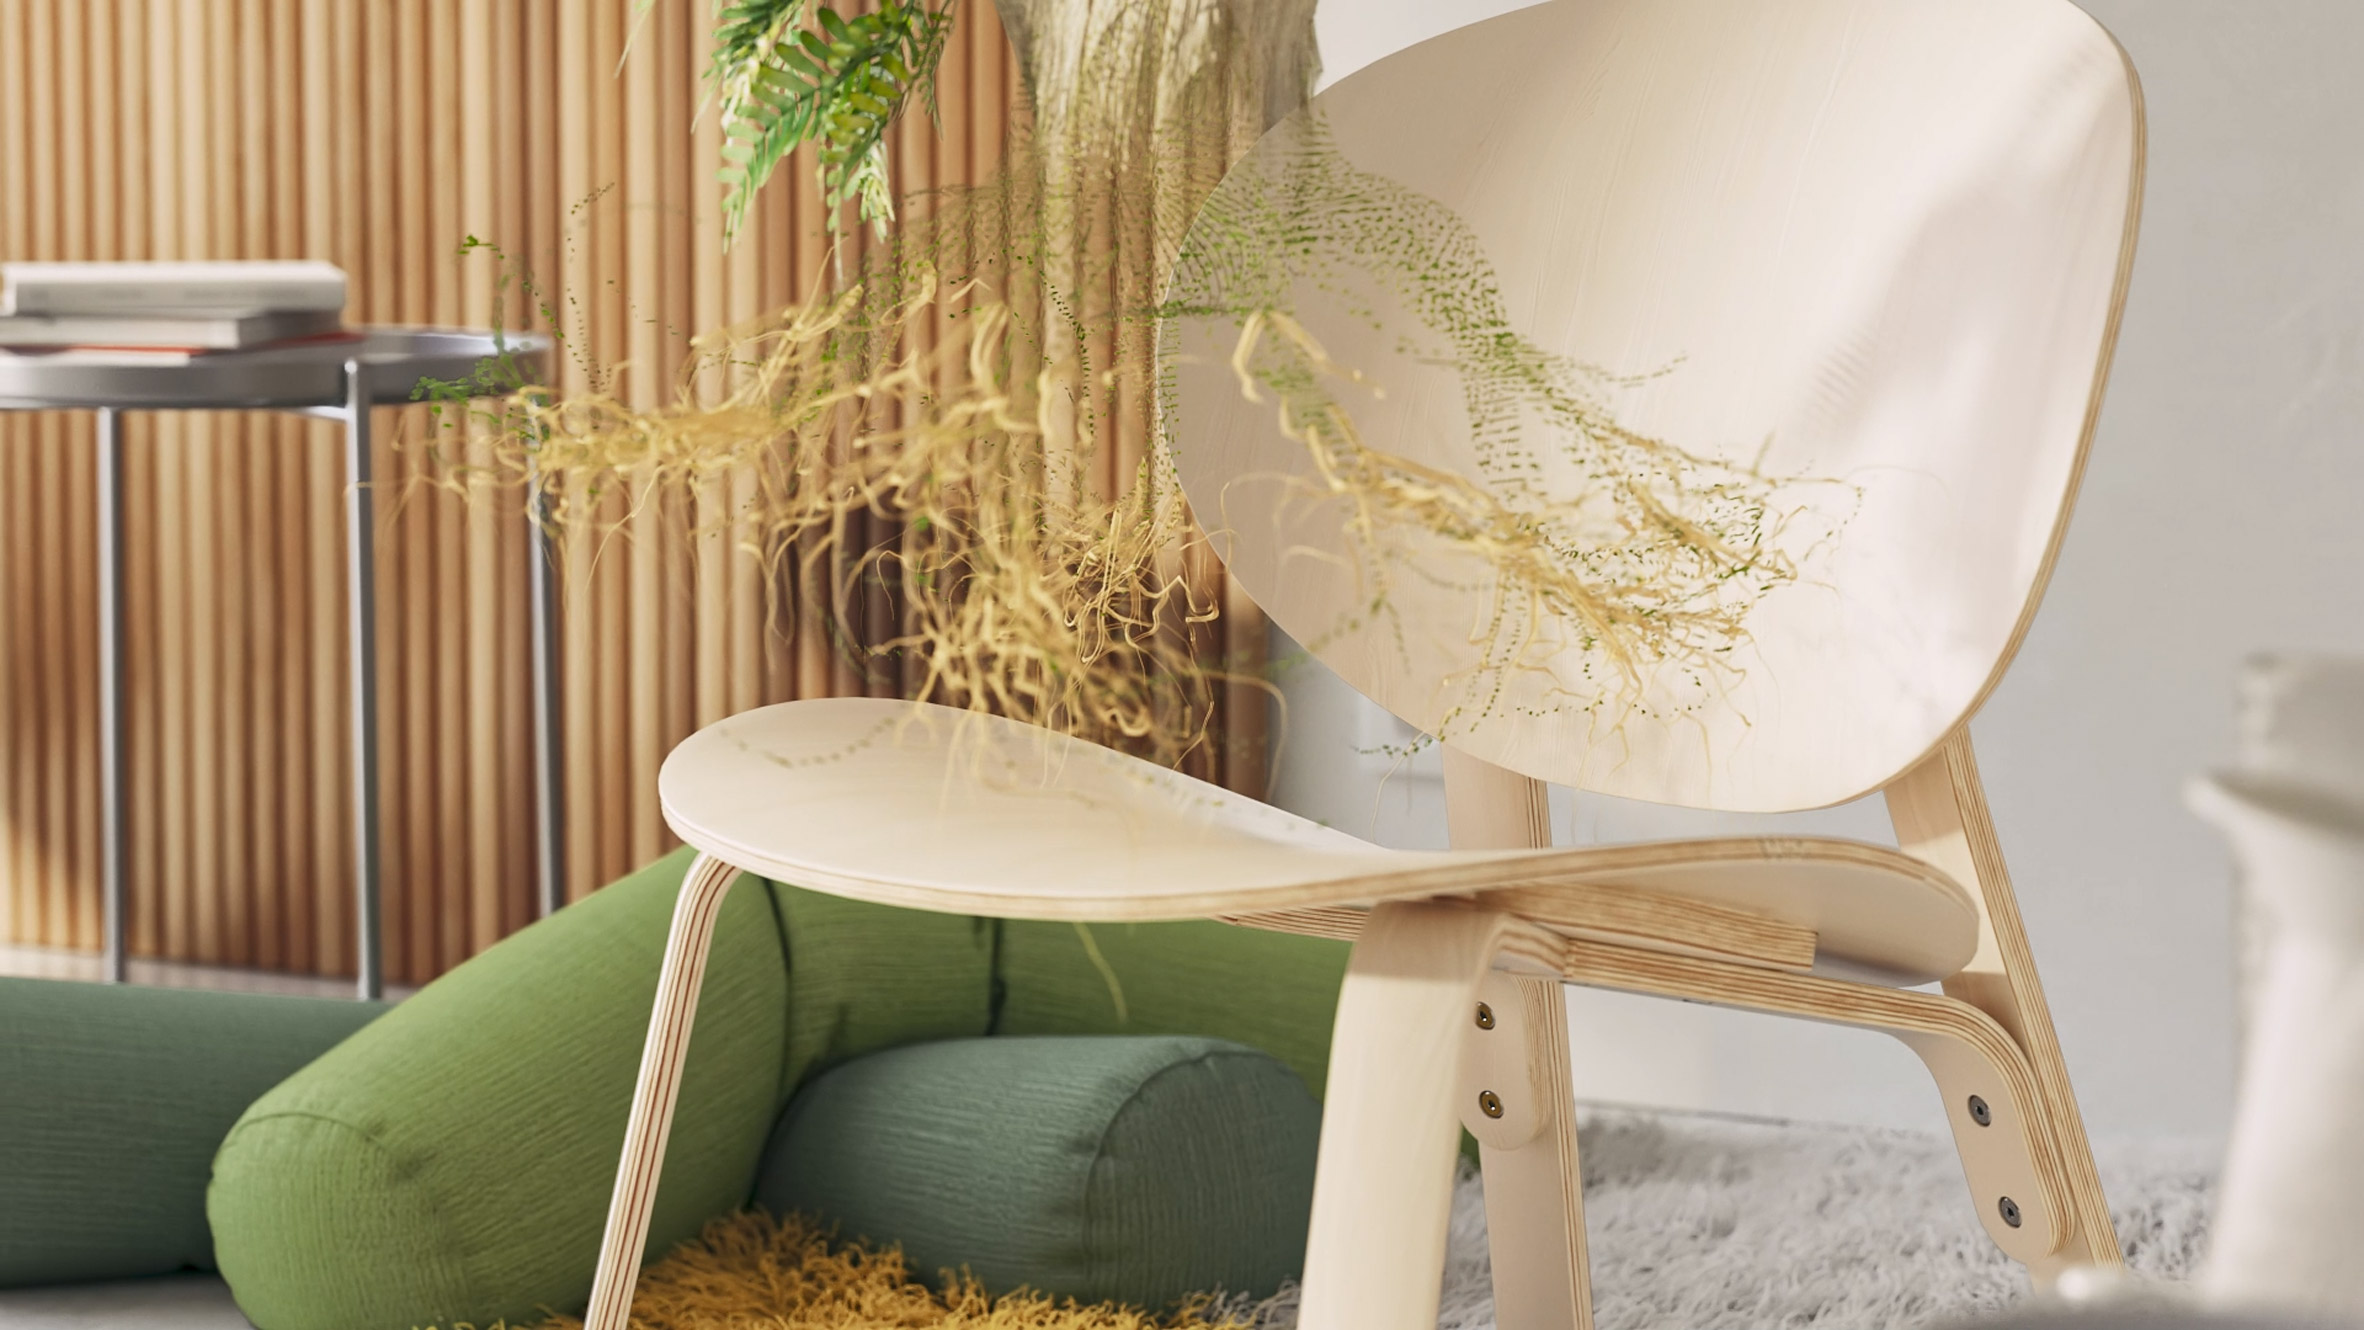 Crossing worlds: Ikea's brightest collaborations - YOURFOREST